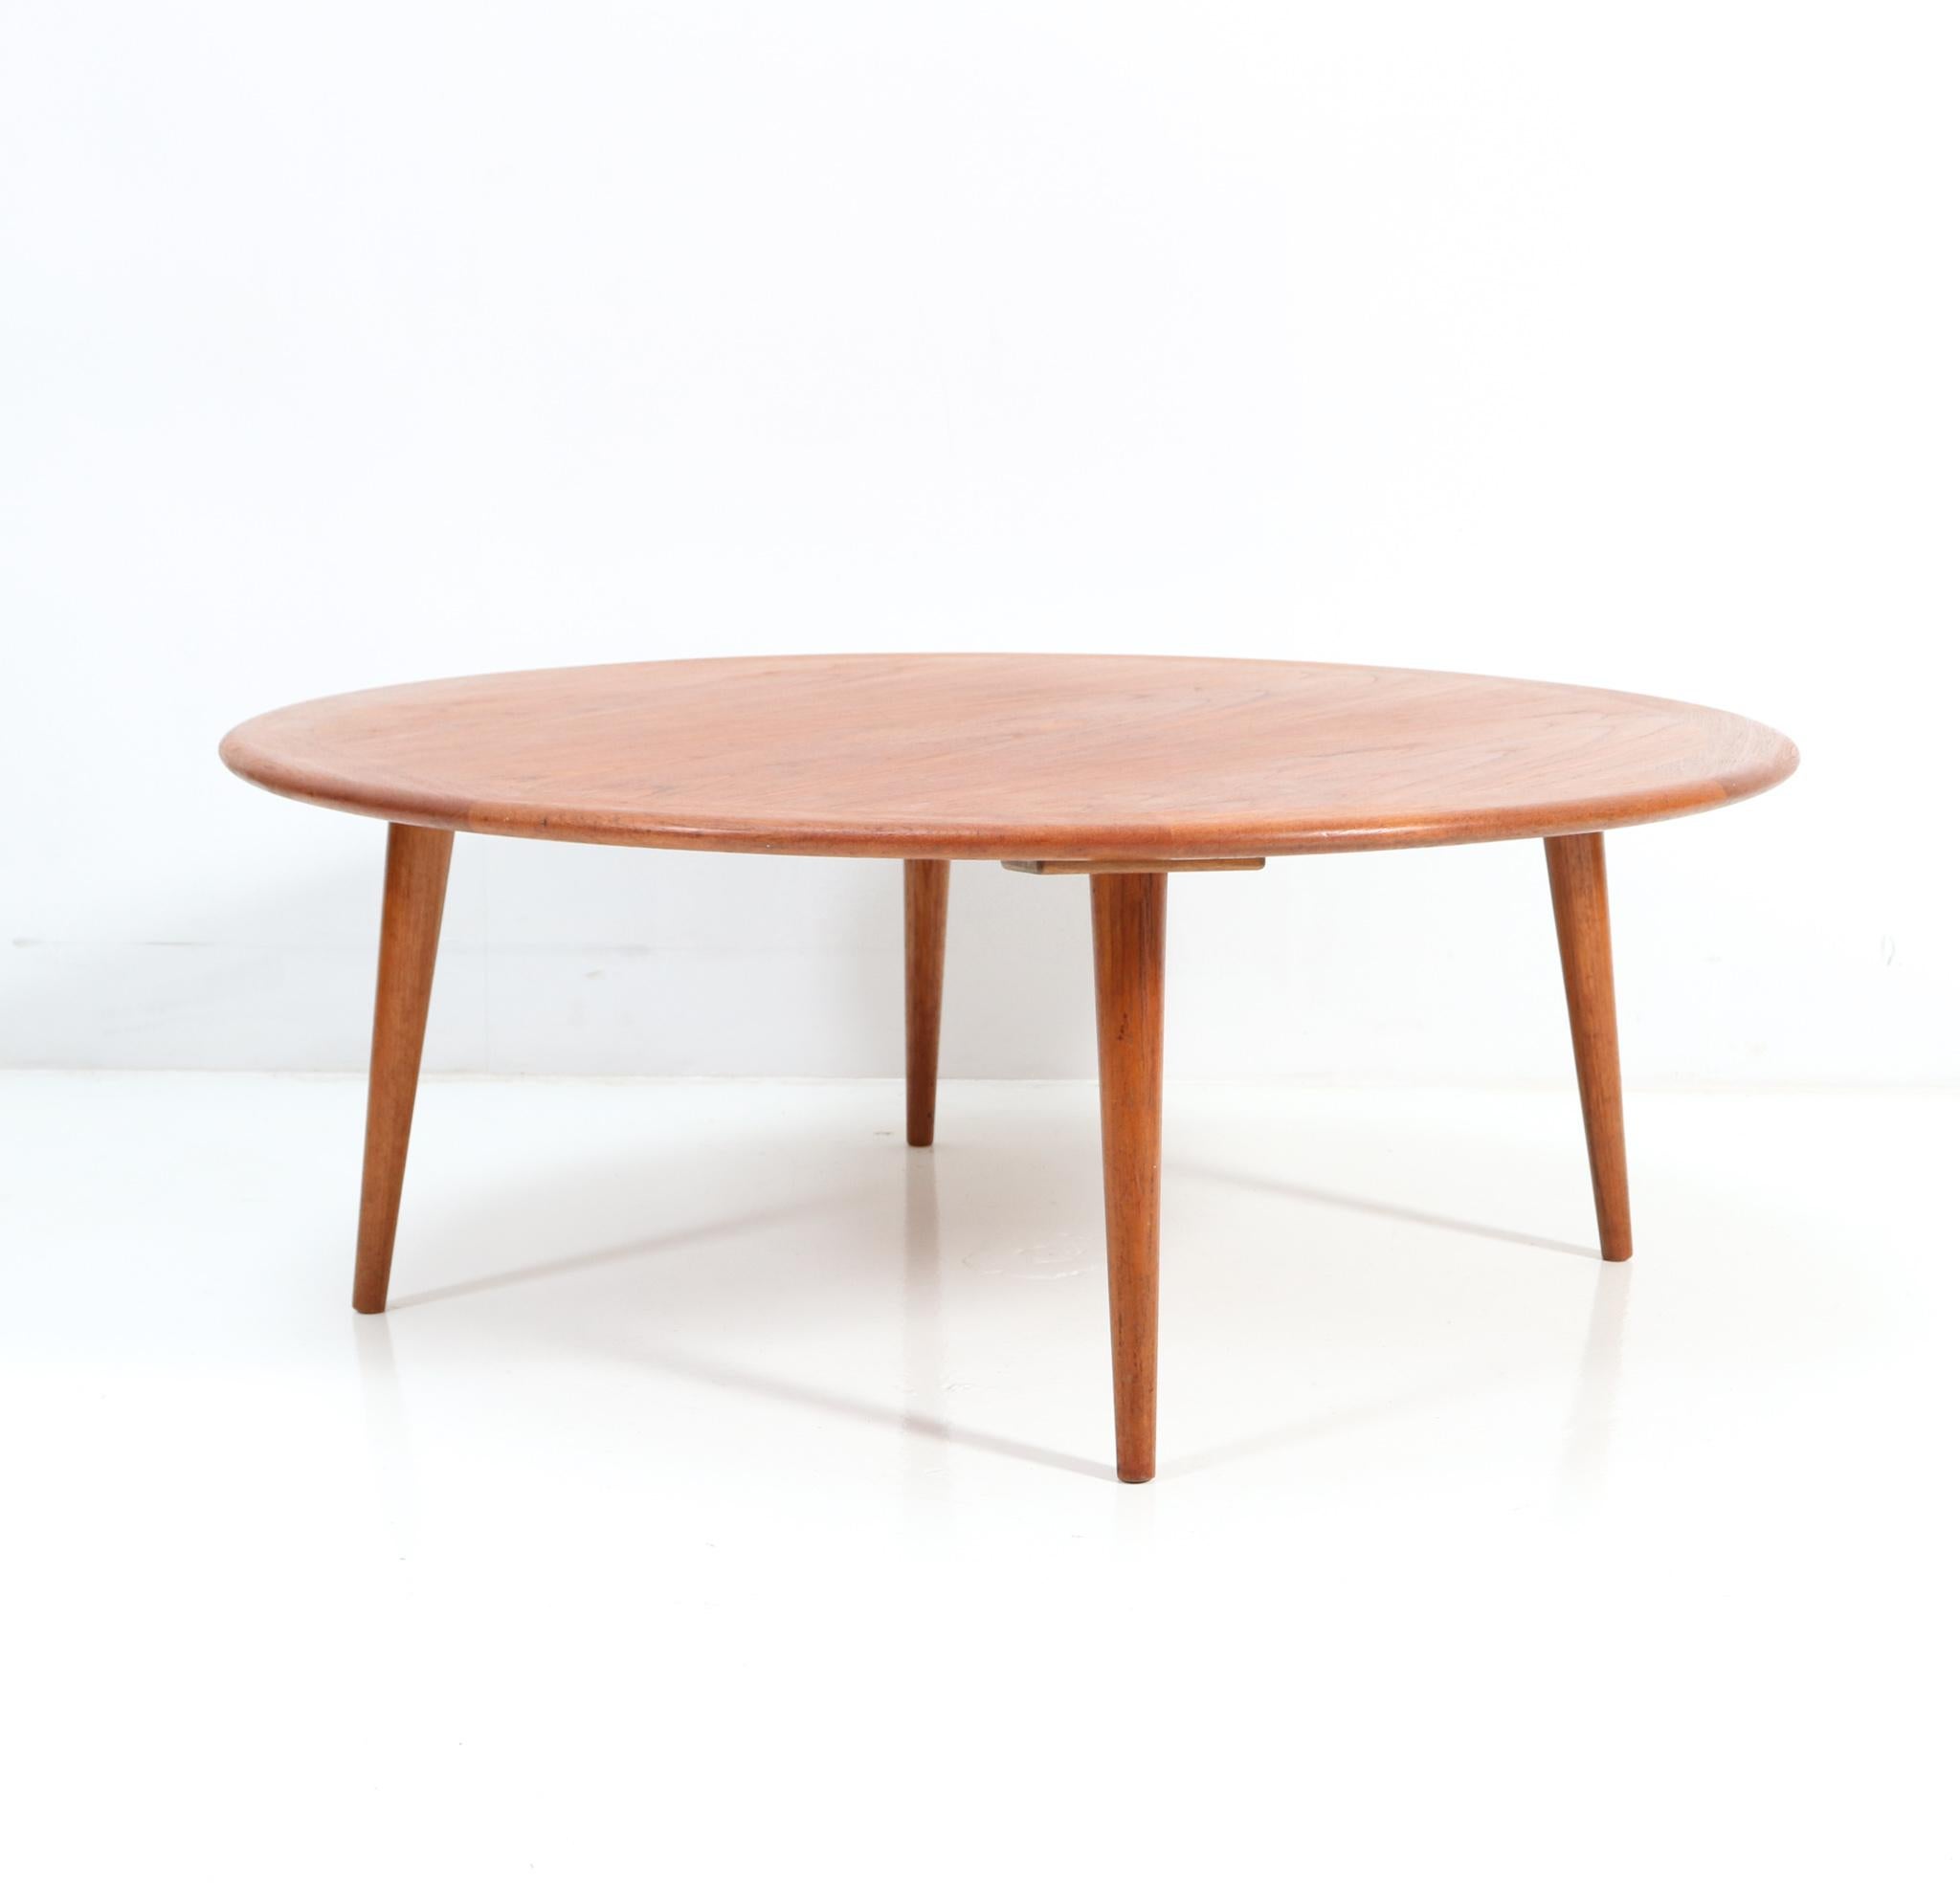 Stunning Mid-Century Modern coffee table.
Design by H. Pander & Zonen Den Haag.
Striking Dutch design from the 1960s.
Solid teak with original teak veneer top with four solid
teak legs.
Marked with original metal manufacturers tag.
This